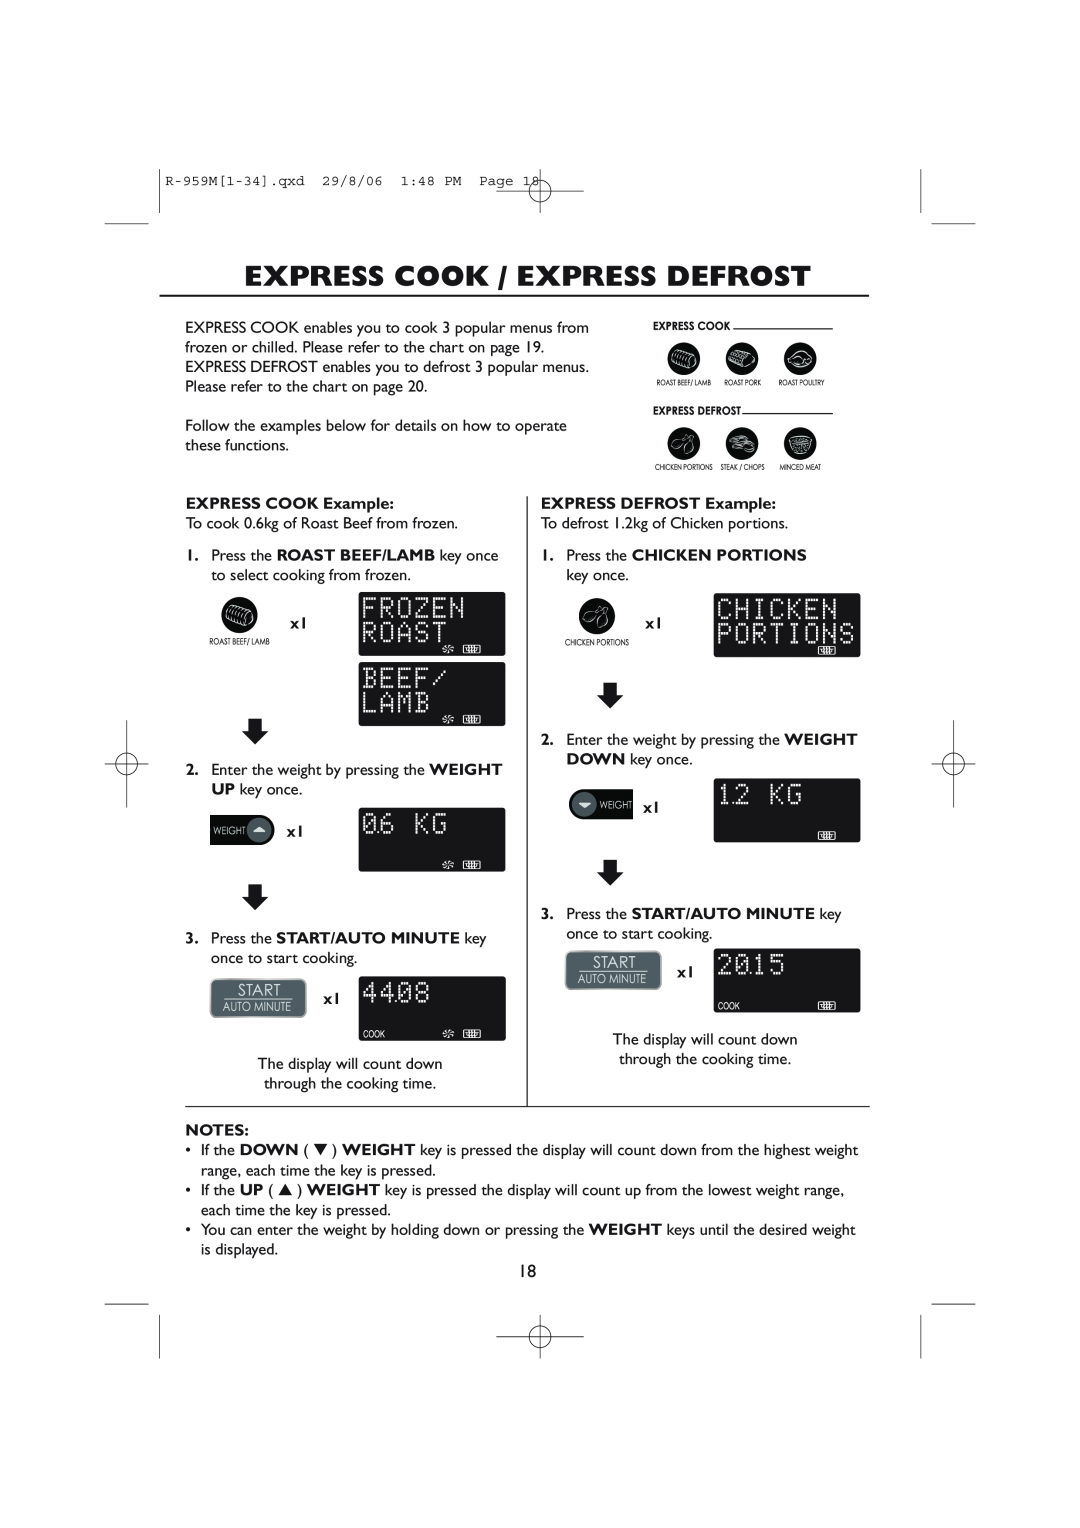 Sharp R-98STM-A, R-959M operation manual Express Cook / Express Defrost, EXPRESS COOK Example, EXPRESS DEFROST Example 